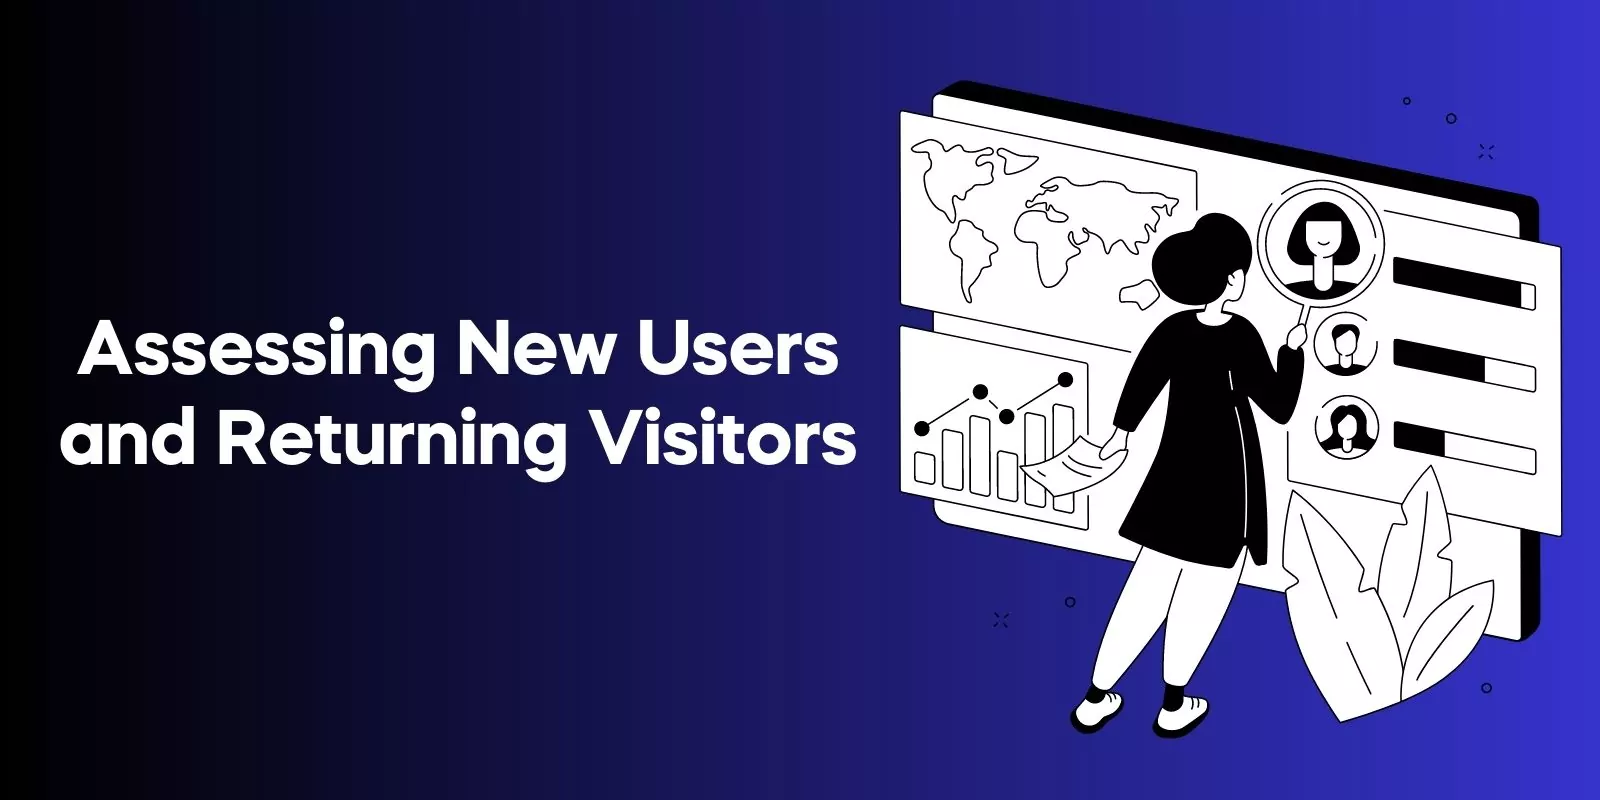 Assessing New Users and Returning Visitors